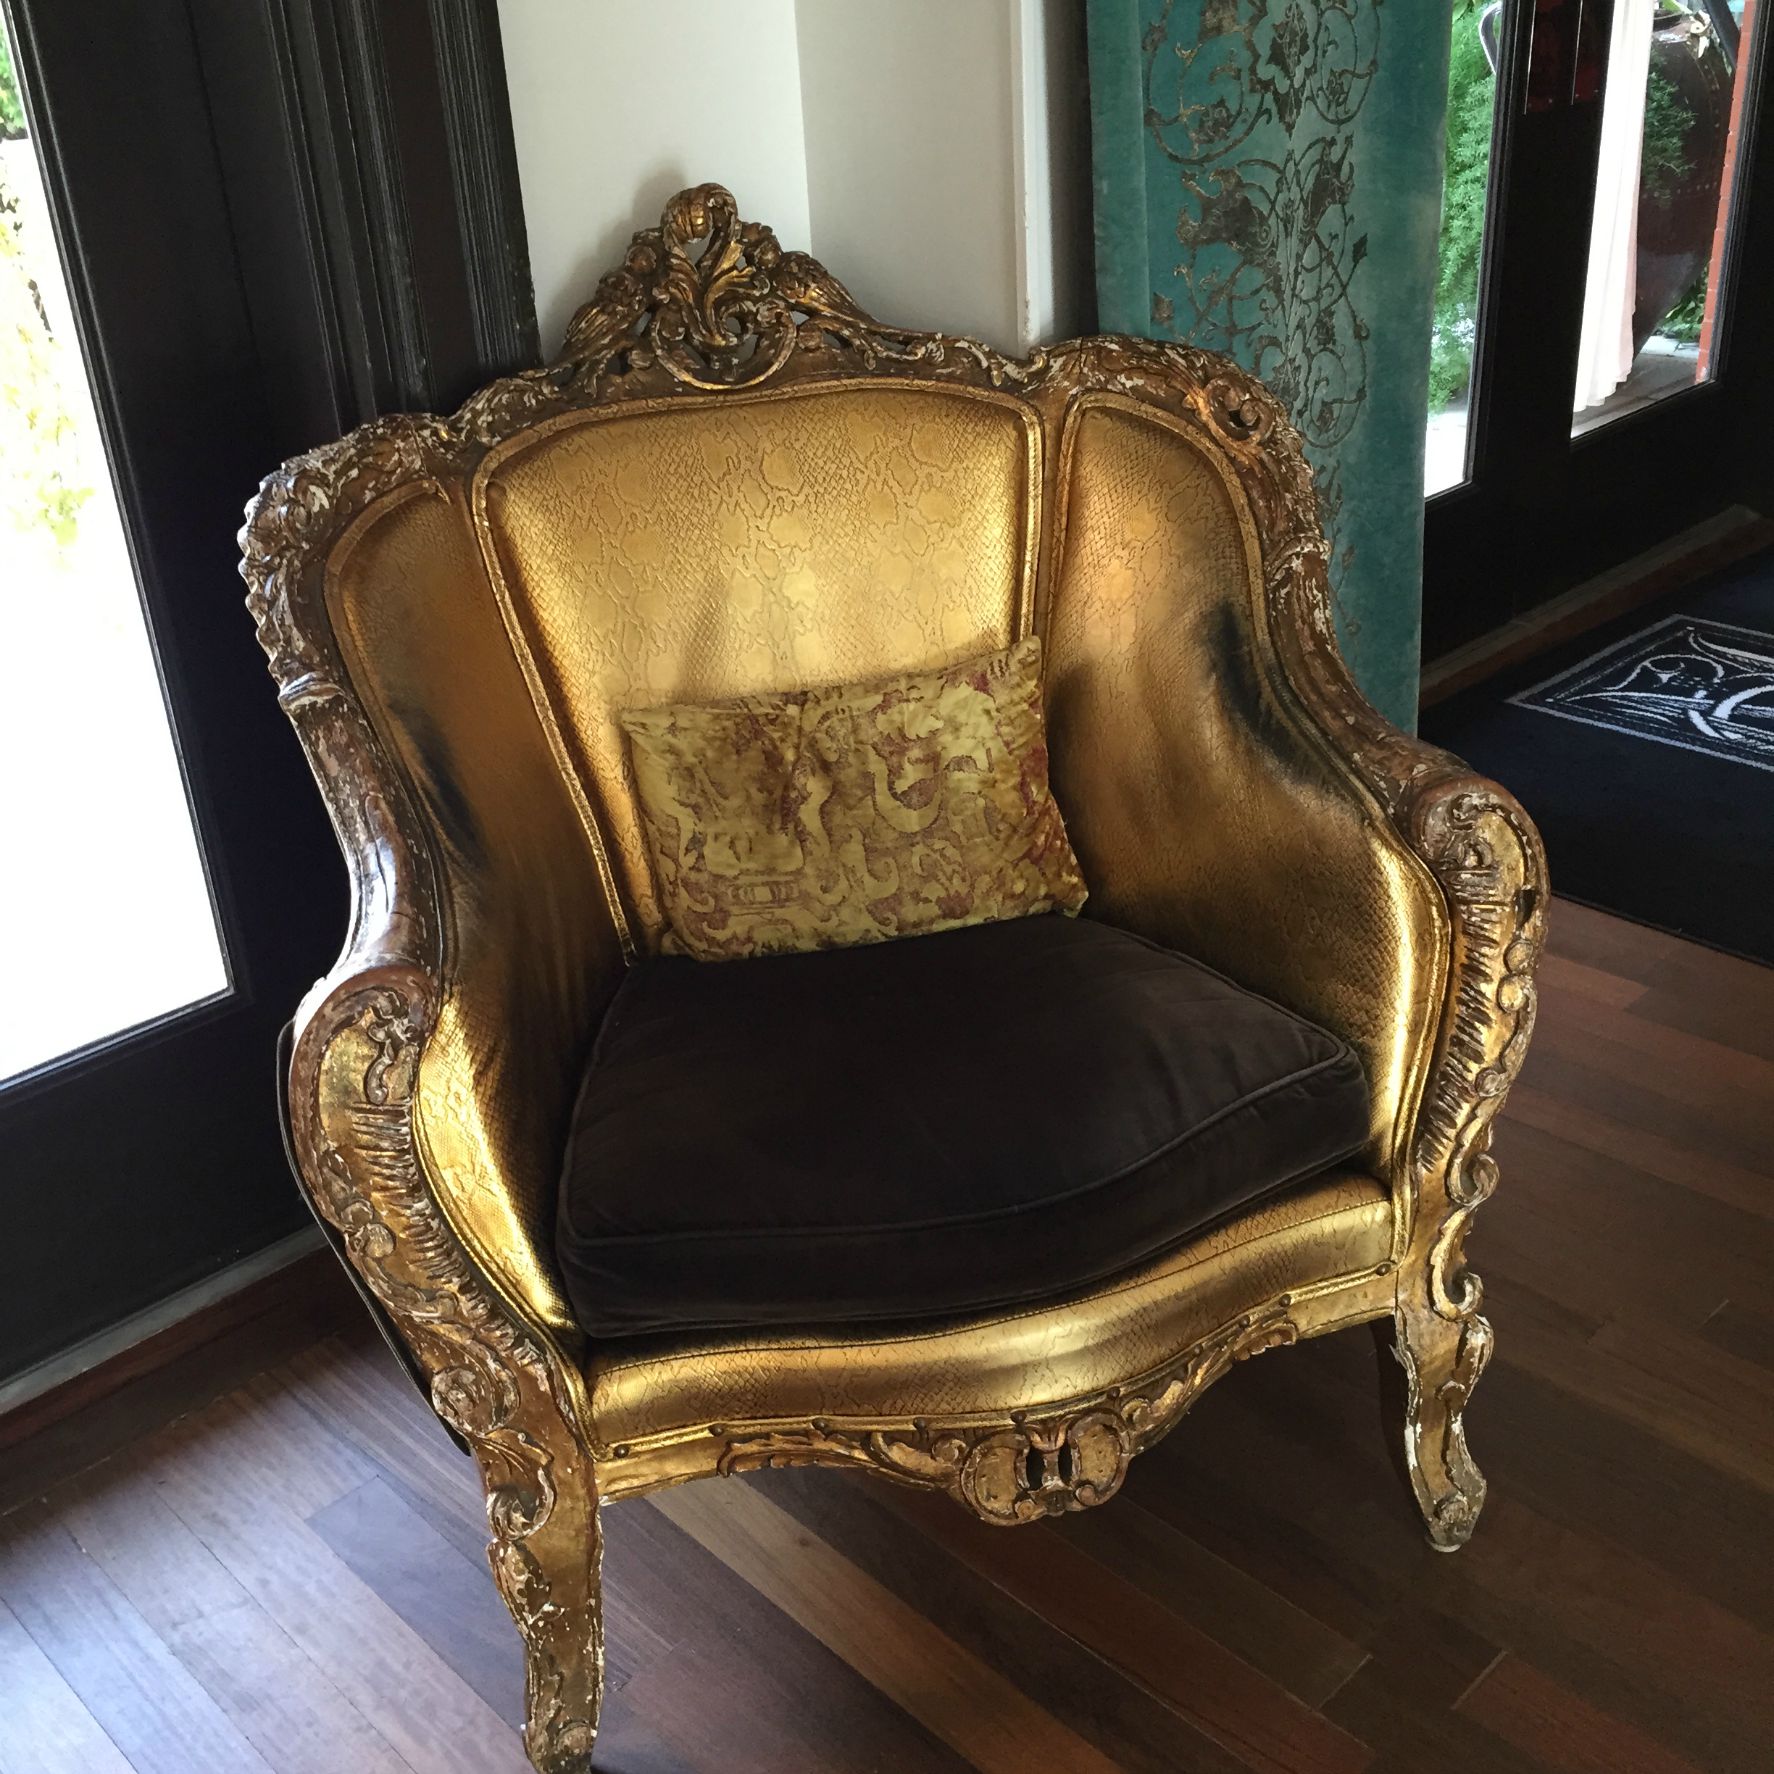 Mansion forsyth park - gold chair lobby - This is our Bliss